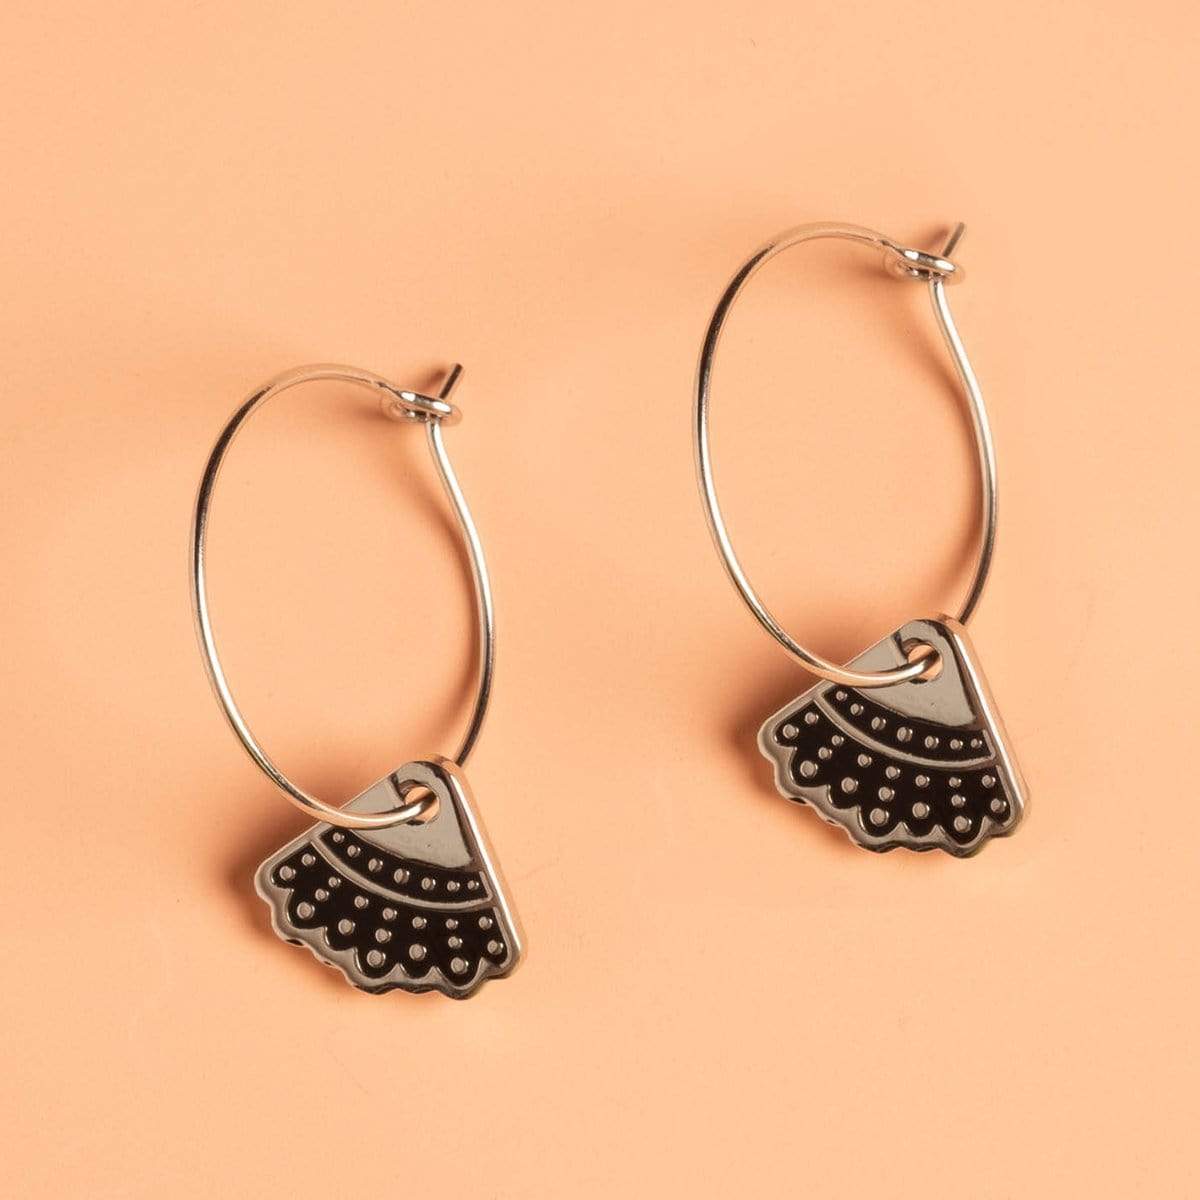 Dissent Collar Hoop and Charm Earrings